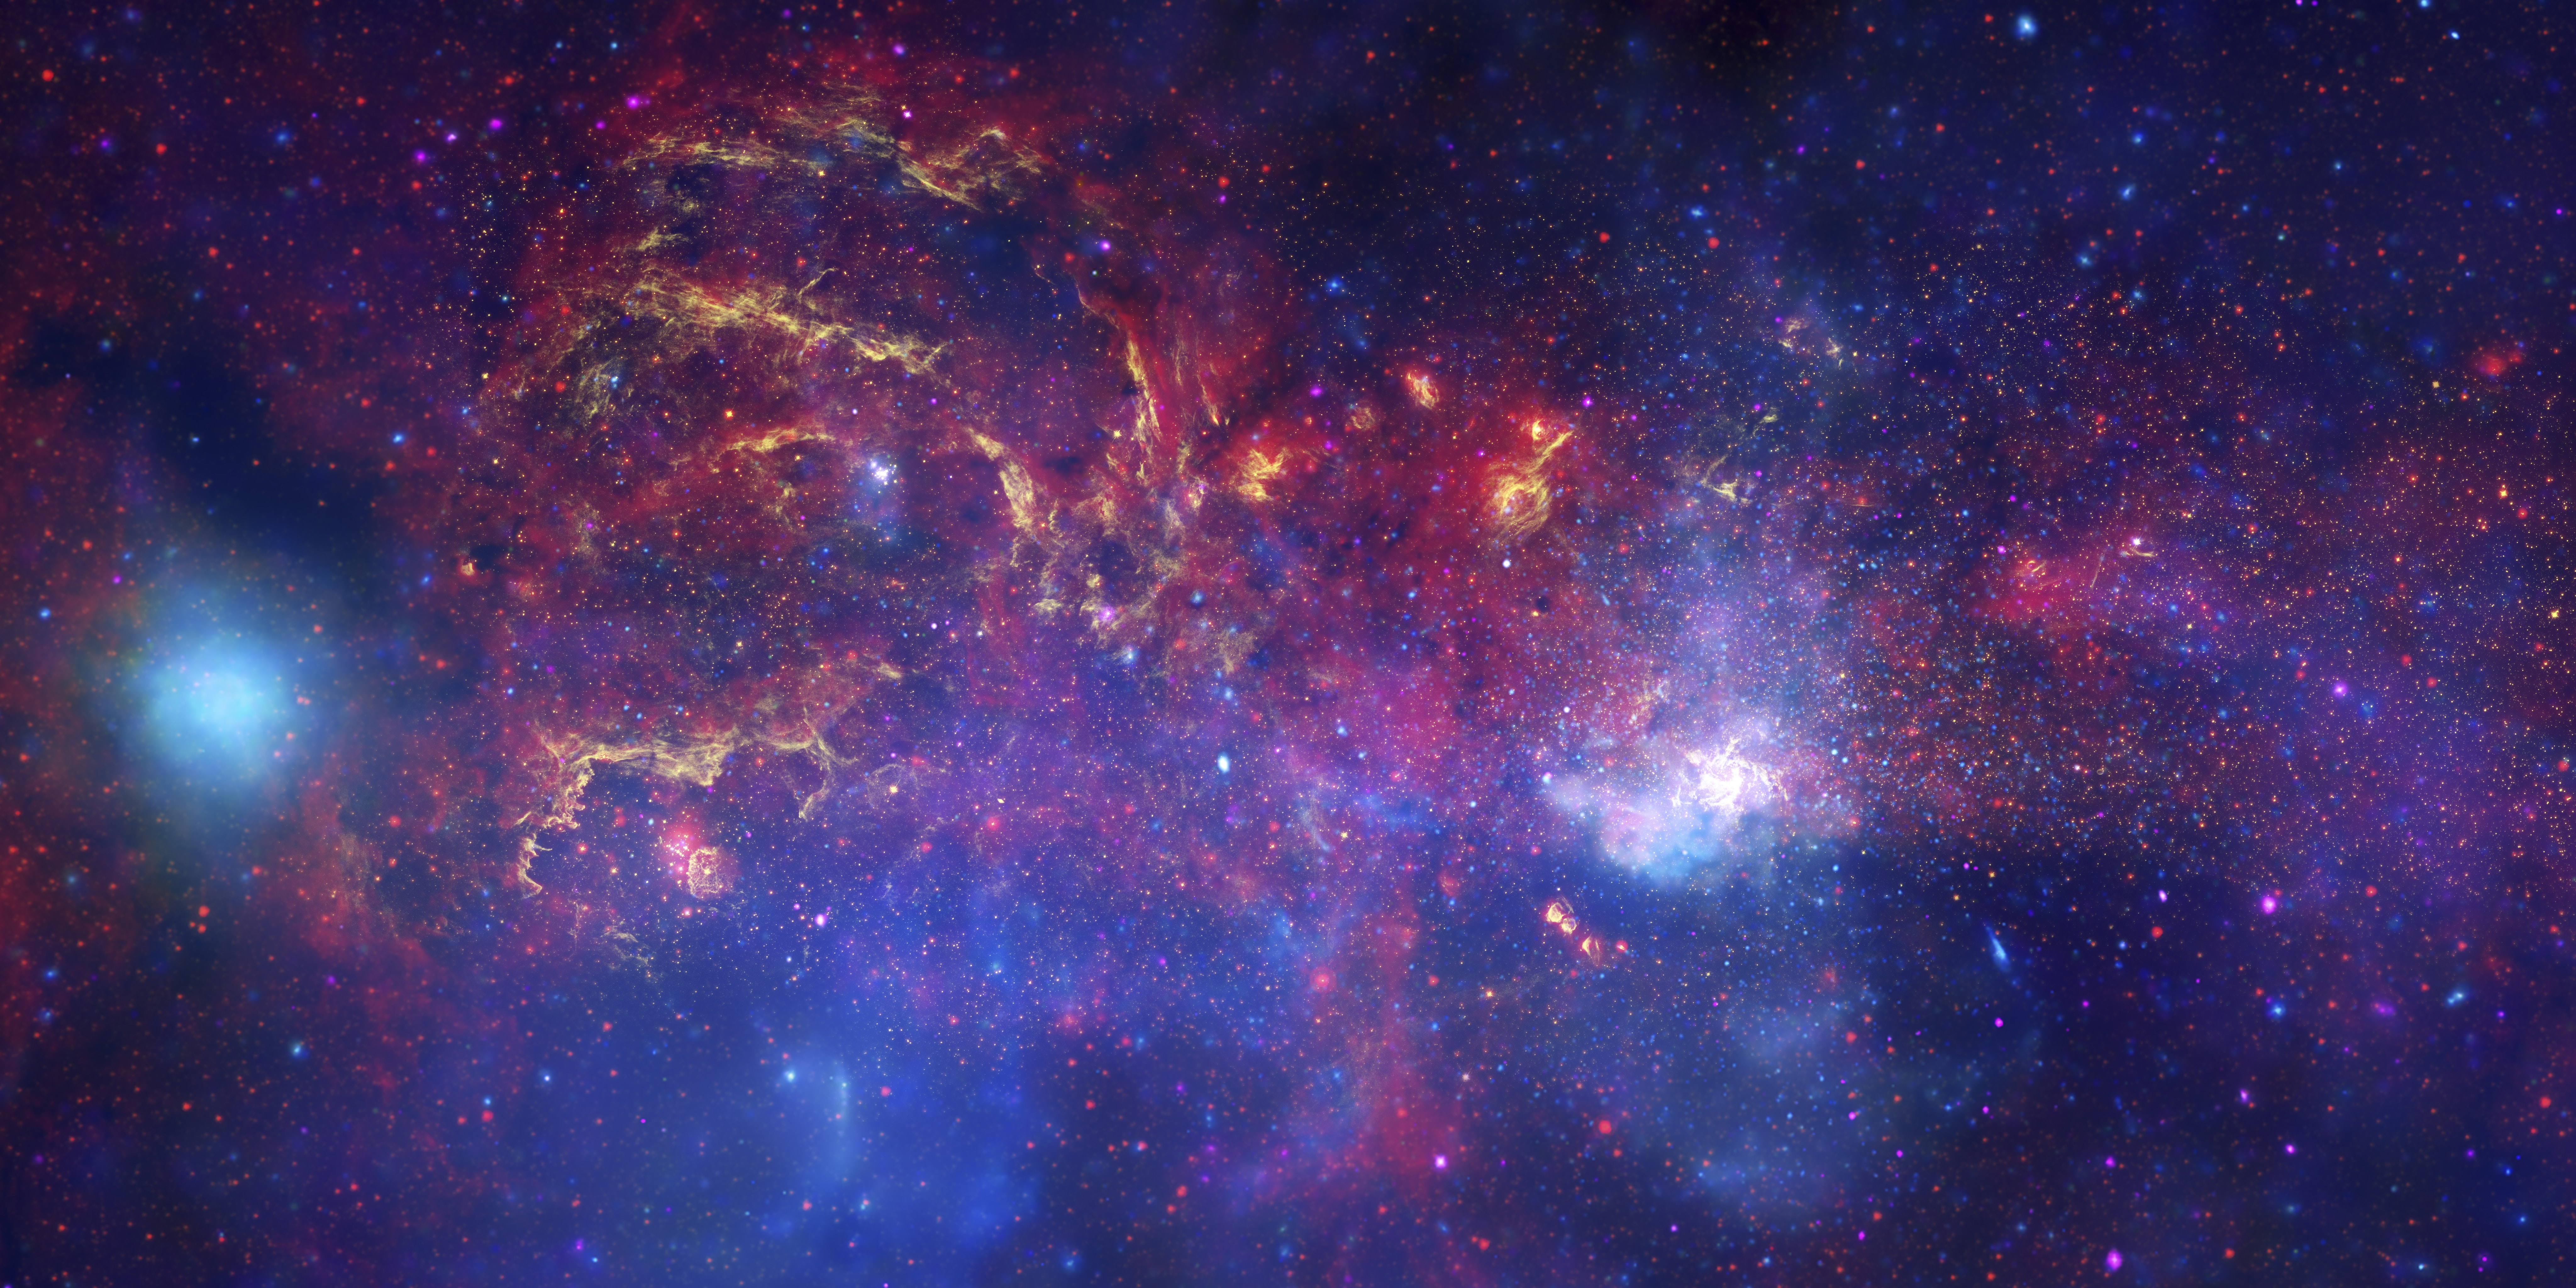 An image of a dense, bulbous, gas- and star-filled region of space.